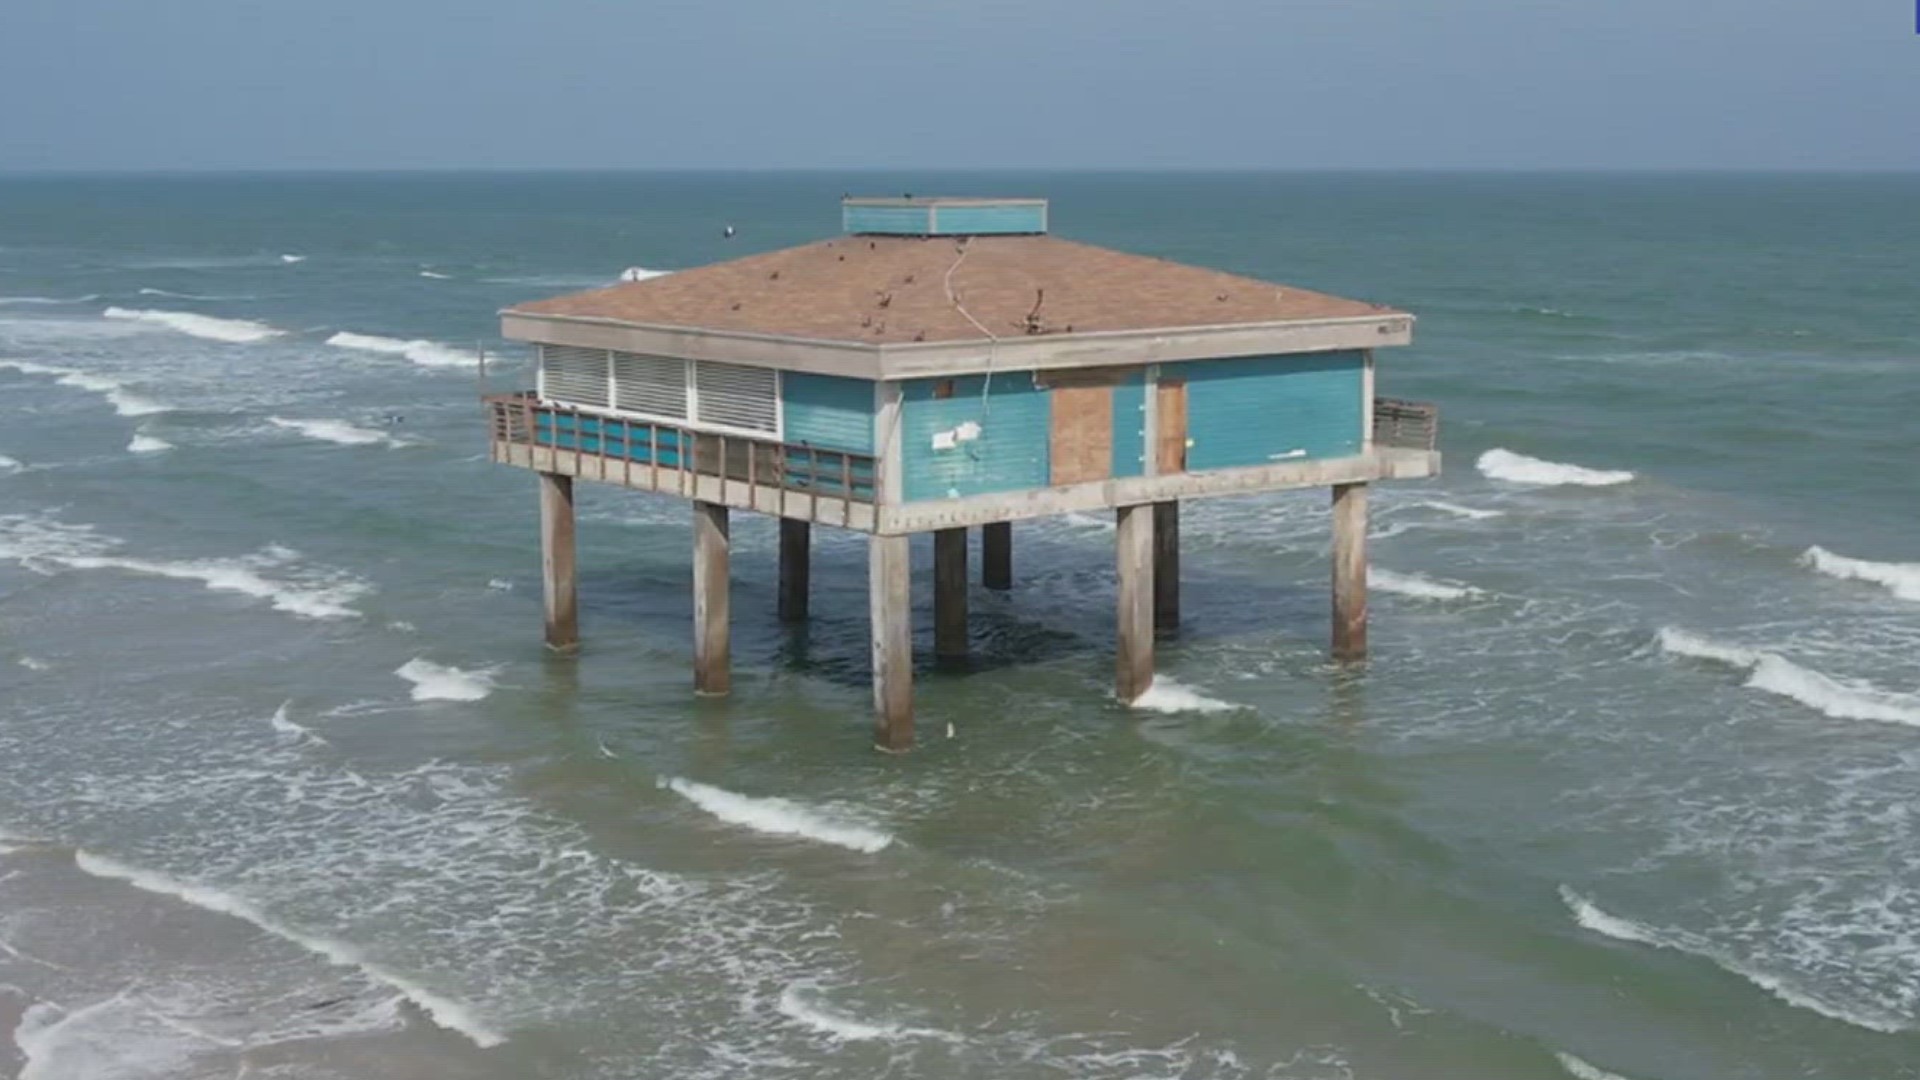 Nueces County Commissioner Joe Gonzalez said he agreed with the court's decision to not approve the second tier because of the pier's proximity to natural disasters.